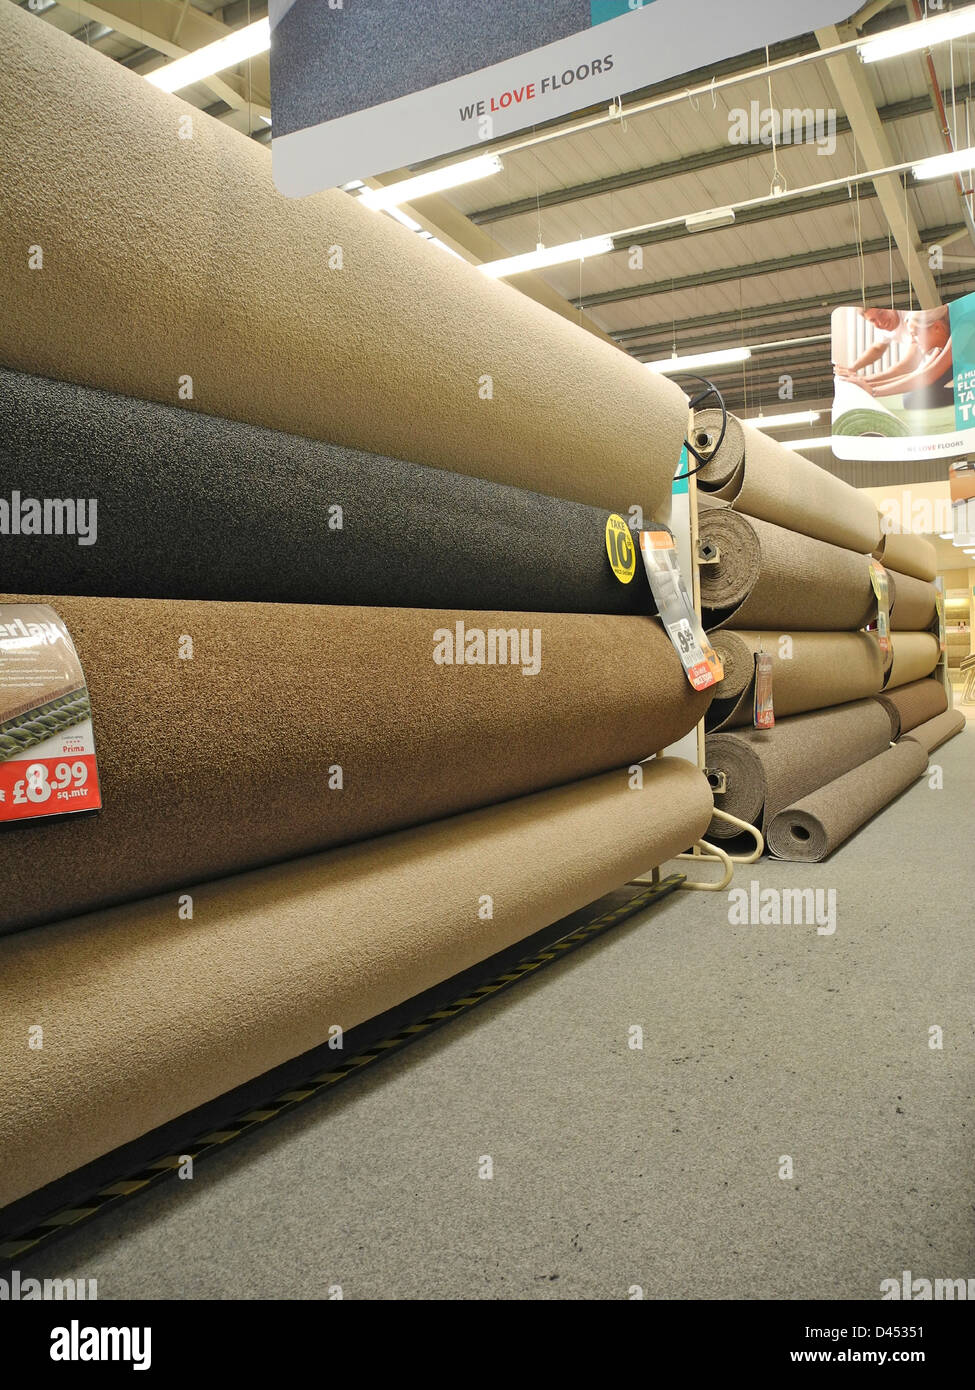 Interior of a carpet store this is Carpetright Stock Photo